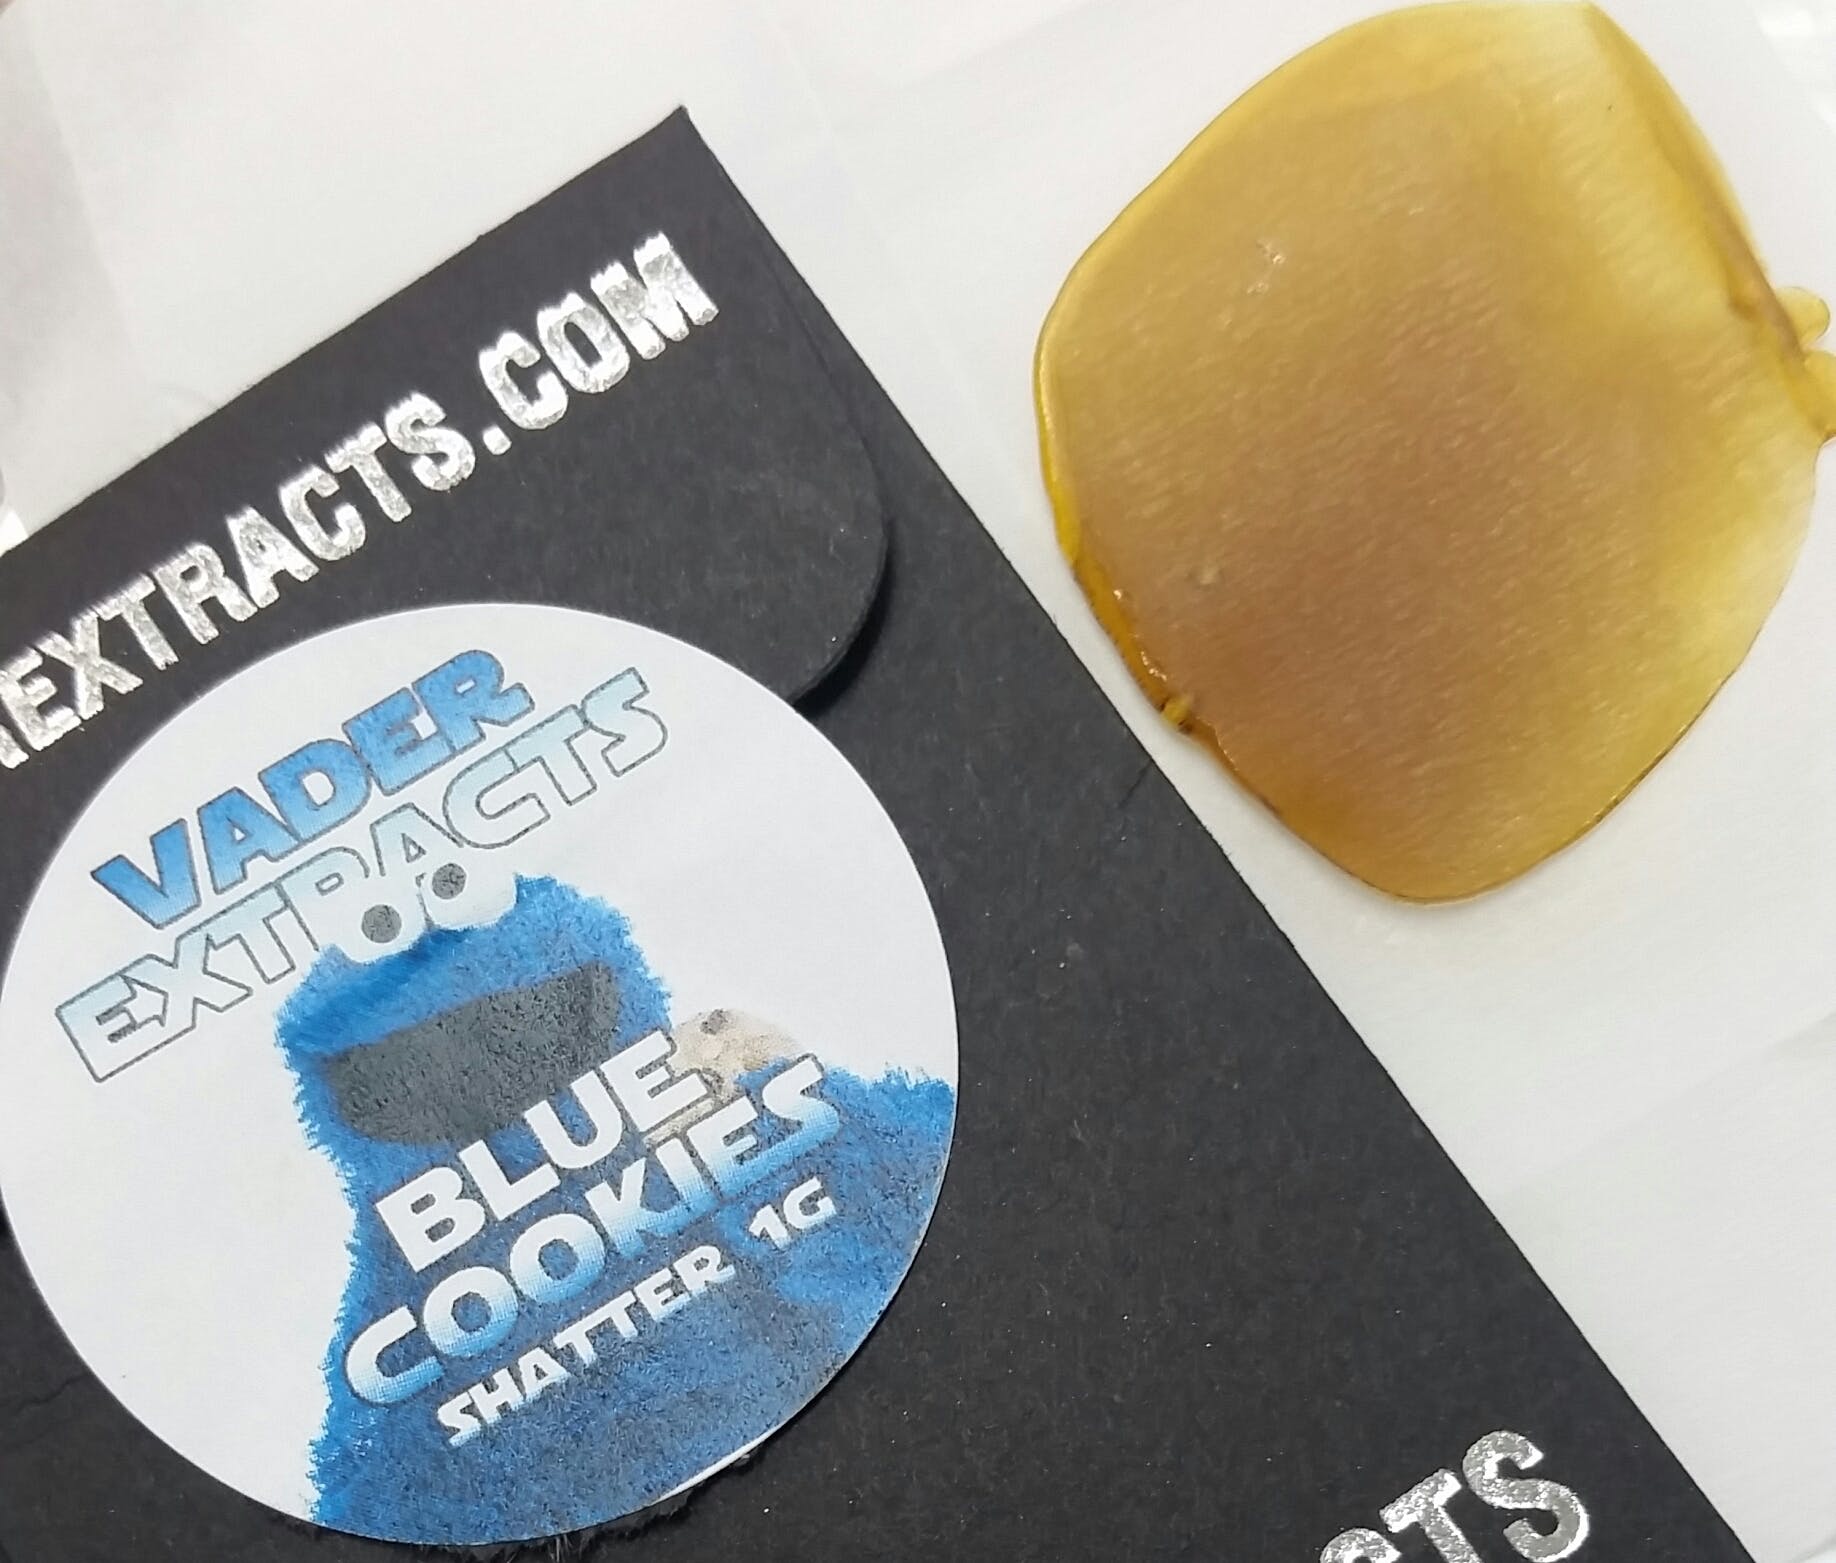 wax-vader-extracts-blue-cookies-shatter